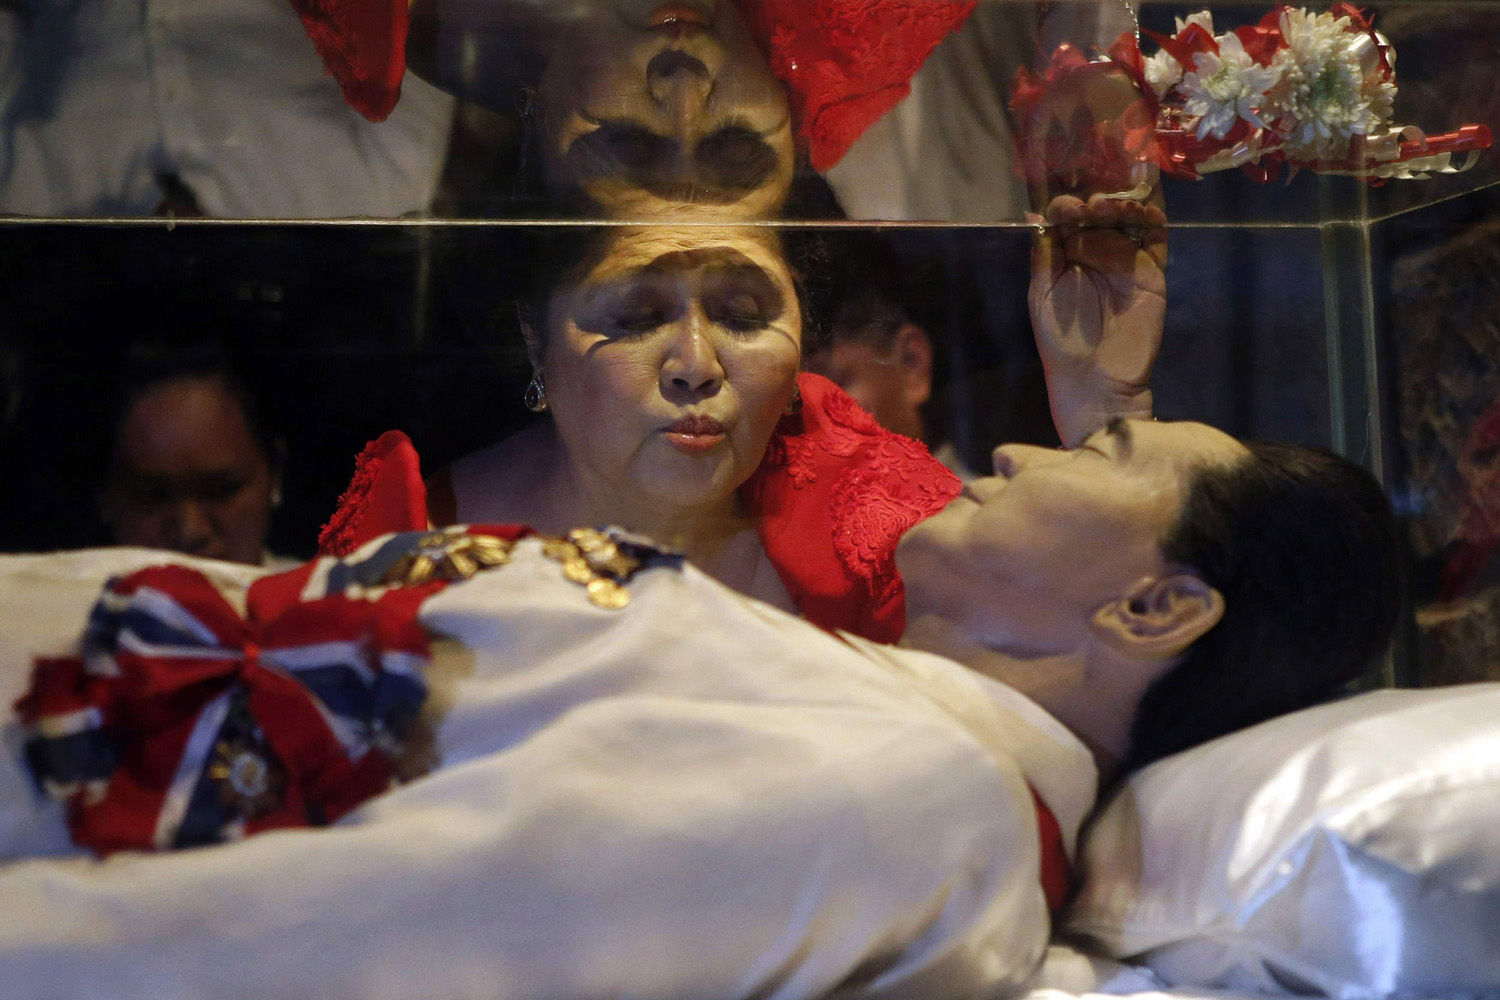 Jul. 2, 2014. Former first lady Imelda Marcos kisses the glass coffin of her husband, late president Ferdinand Marcos, who remains unburied since his death in 1989, during her 85th birthday celebration in Ferdinand Marcos' hometown of Batac, Ilocos Norte province, in northern Philippines.